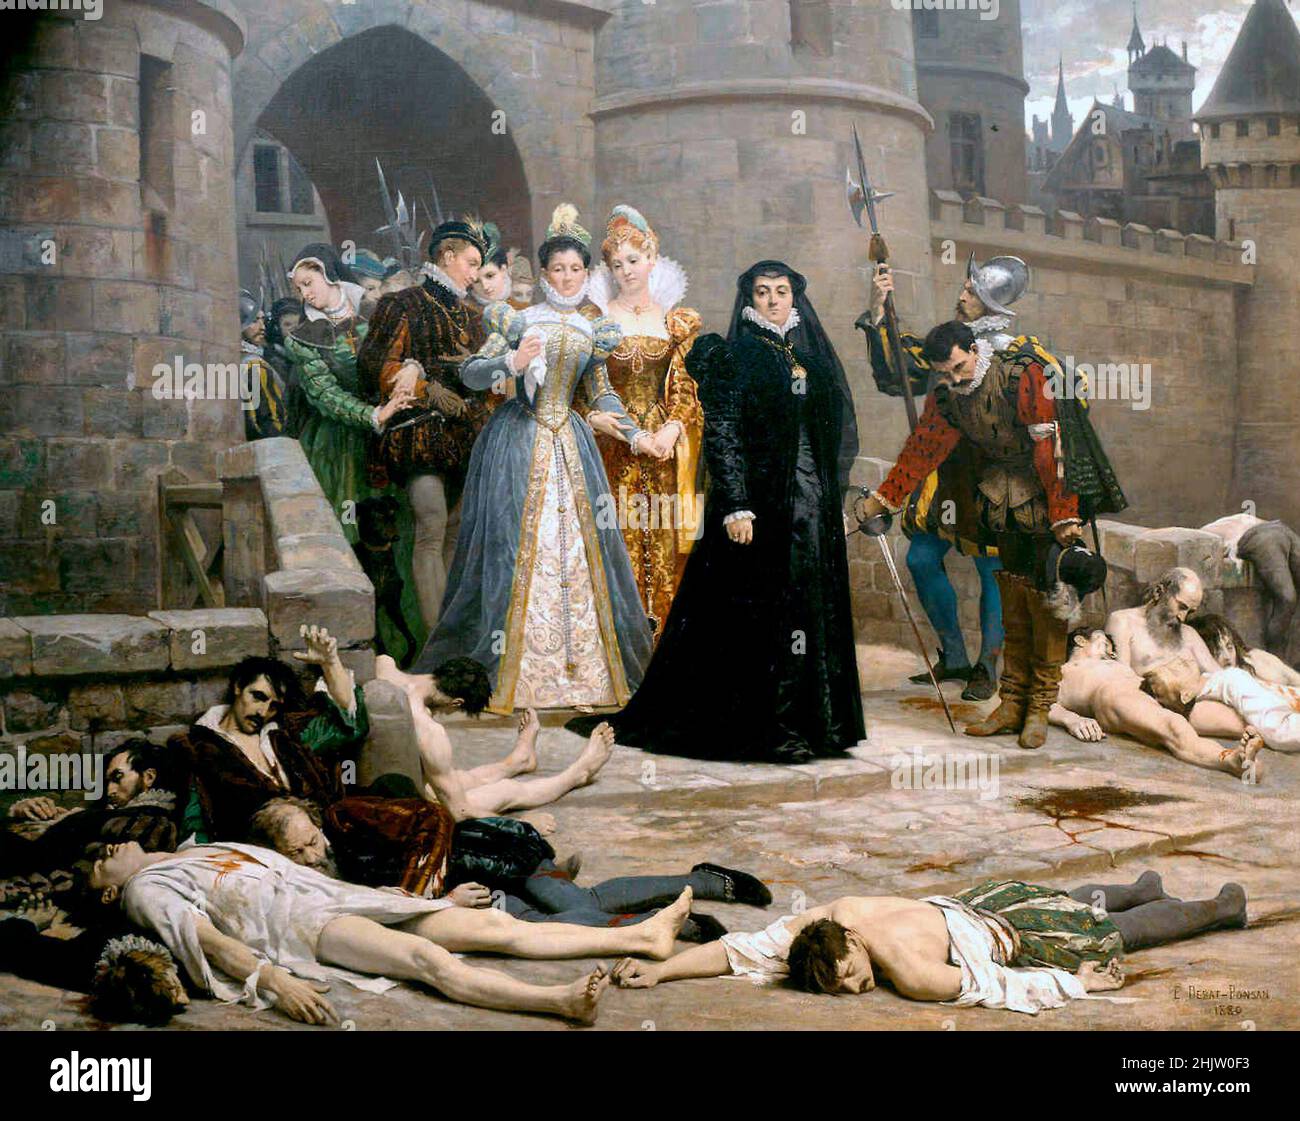 The St Bartholomew's Day massacre (Massacre de la Saint-Barthélemy) in 1572. In the religious war between the royalist Catholics and the Huguenots (French Calvinist Protestants. Over a period of several weeks the mob violence left betweem 50000 and 30,000 protestants dead. In this painting Catherine de Medici, widow of King Henri II, who was blamed for stirring the trouble, is seen looking with satisfaction at the bodies of the dead. Stock Photo